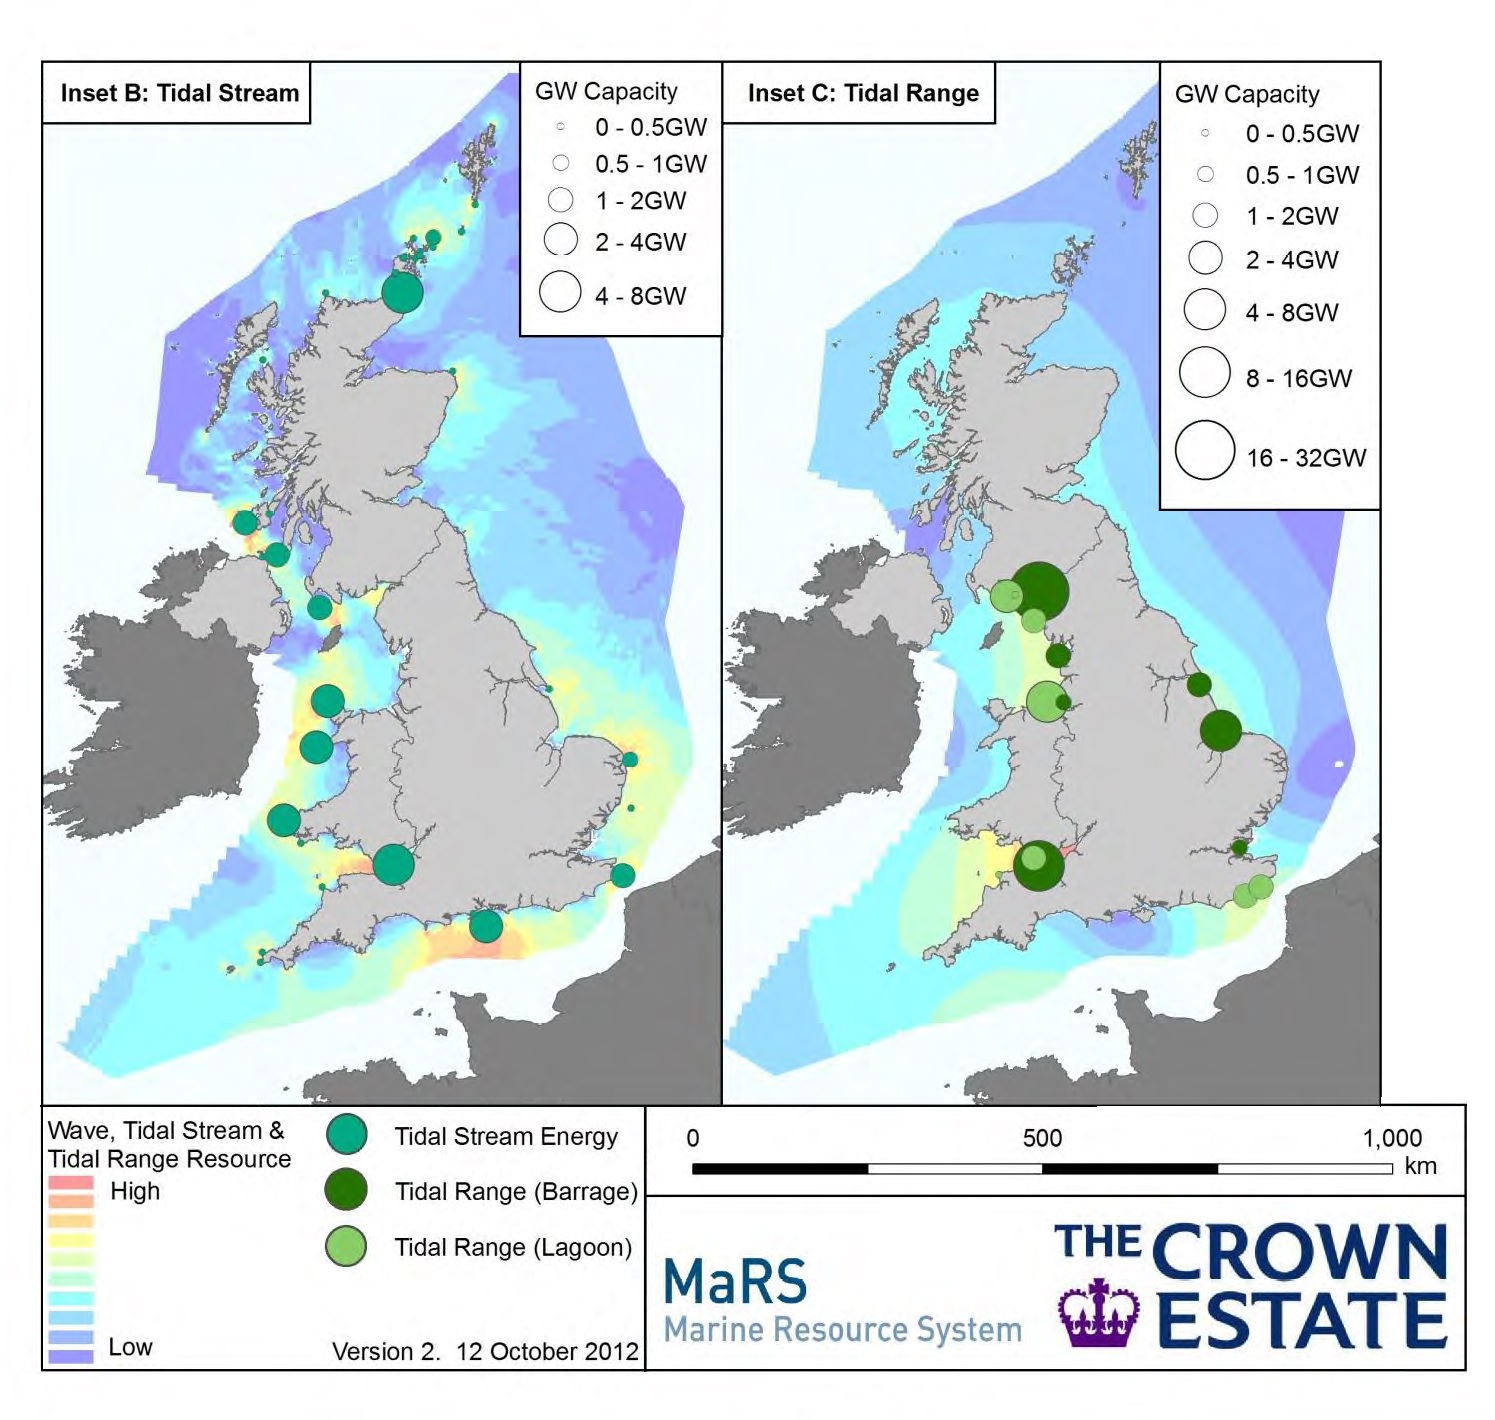 Tidal resources in the UK